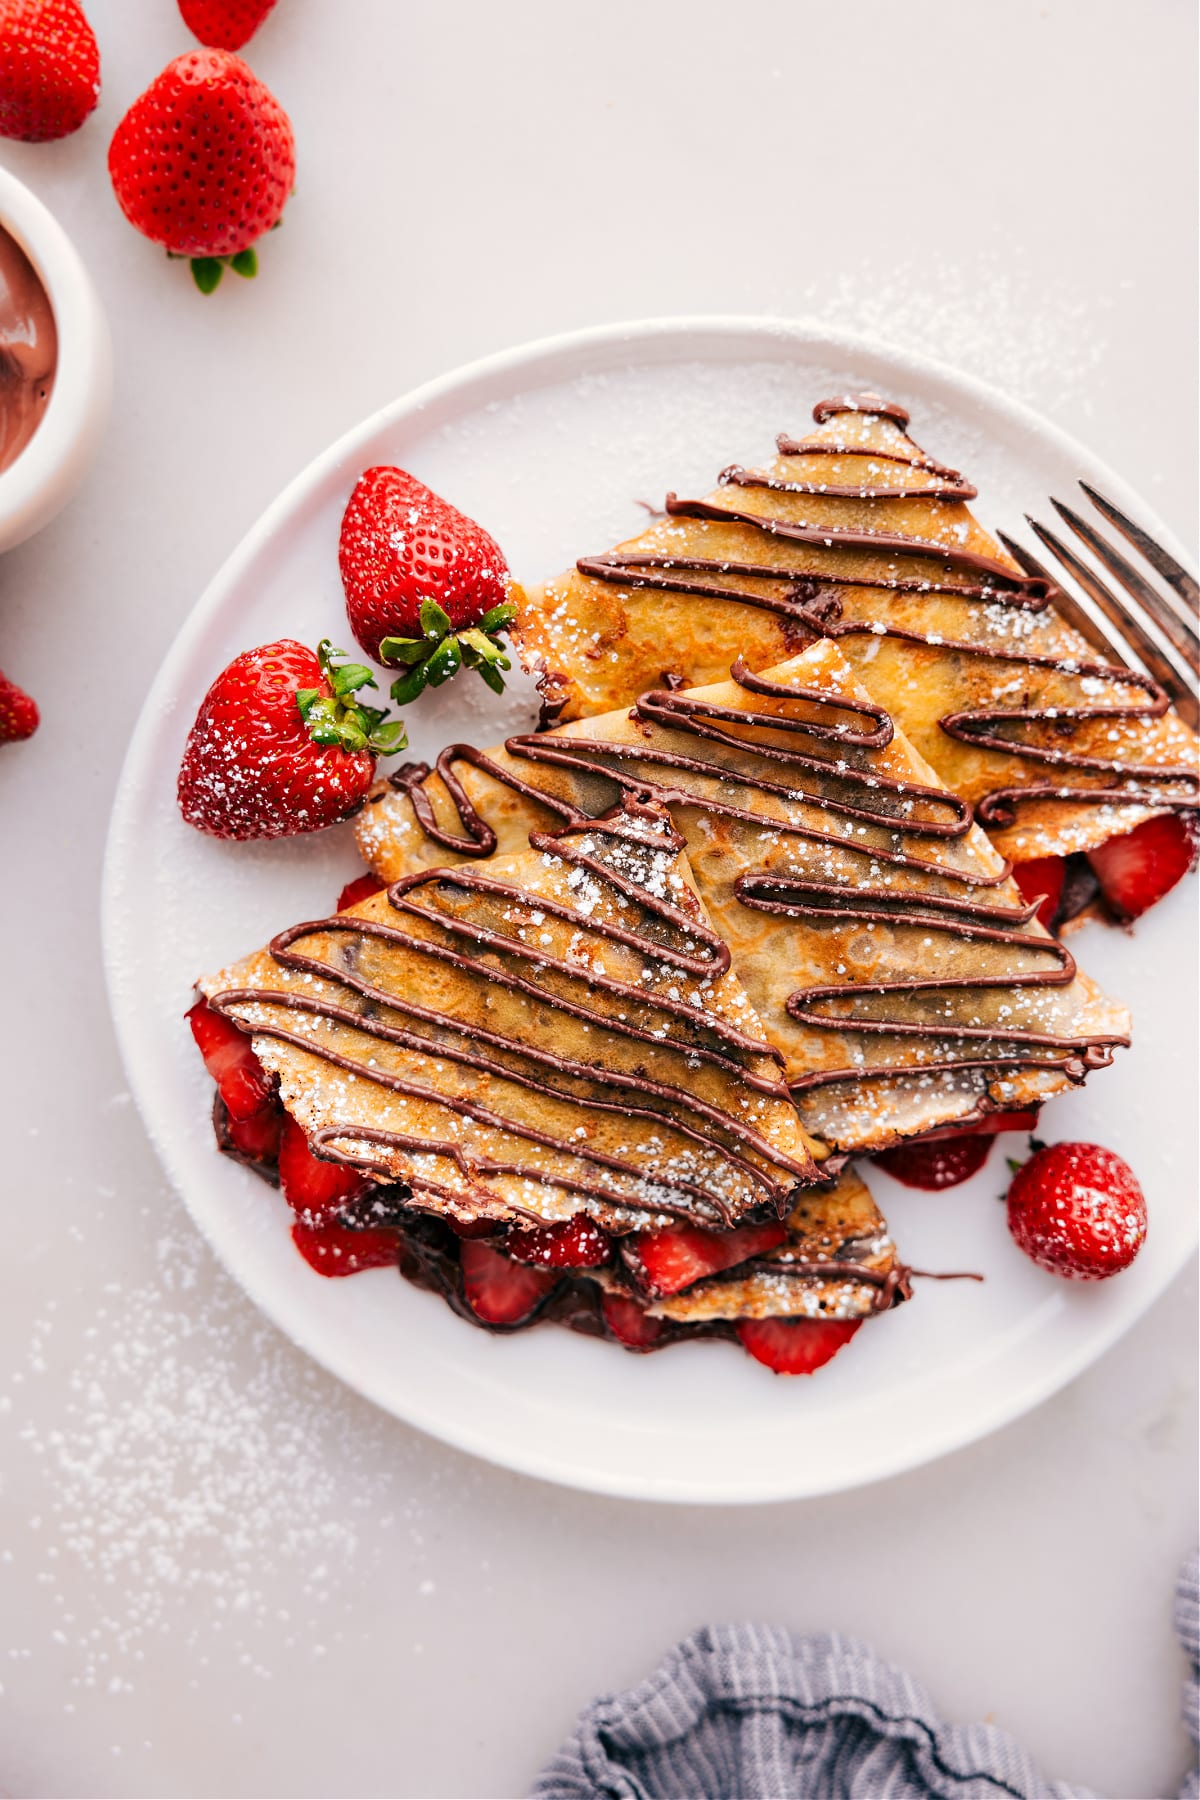 Nutella Crepes (With Strawberries!) - Chelsea's Messy Apron